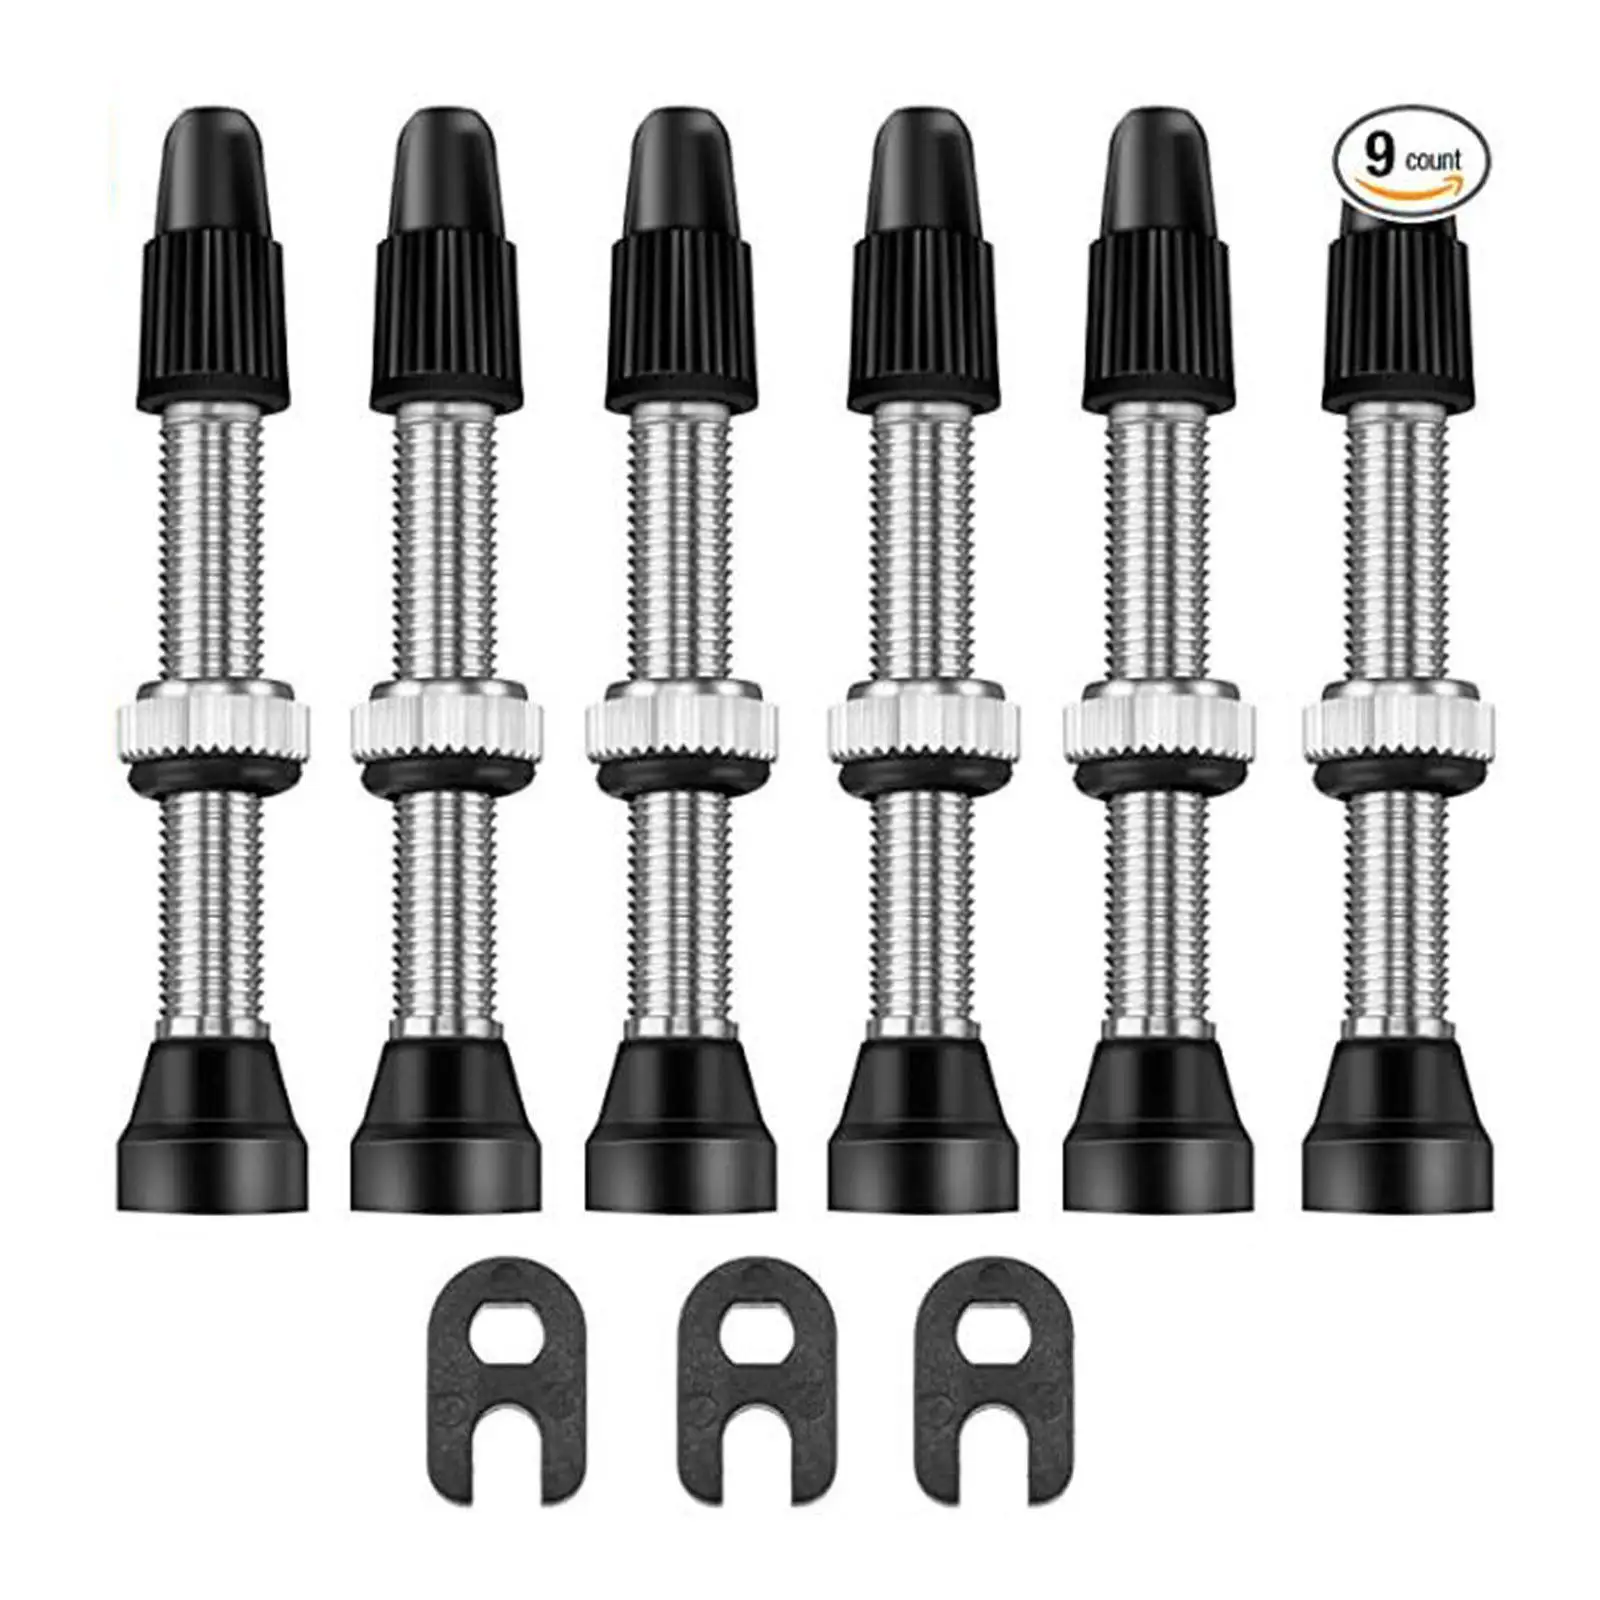 40mm Presta Valve Stem Kit Tubeless with Valve Core Remover Tool and Caps Lightweight for MTB Road Bike Repair Accessories